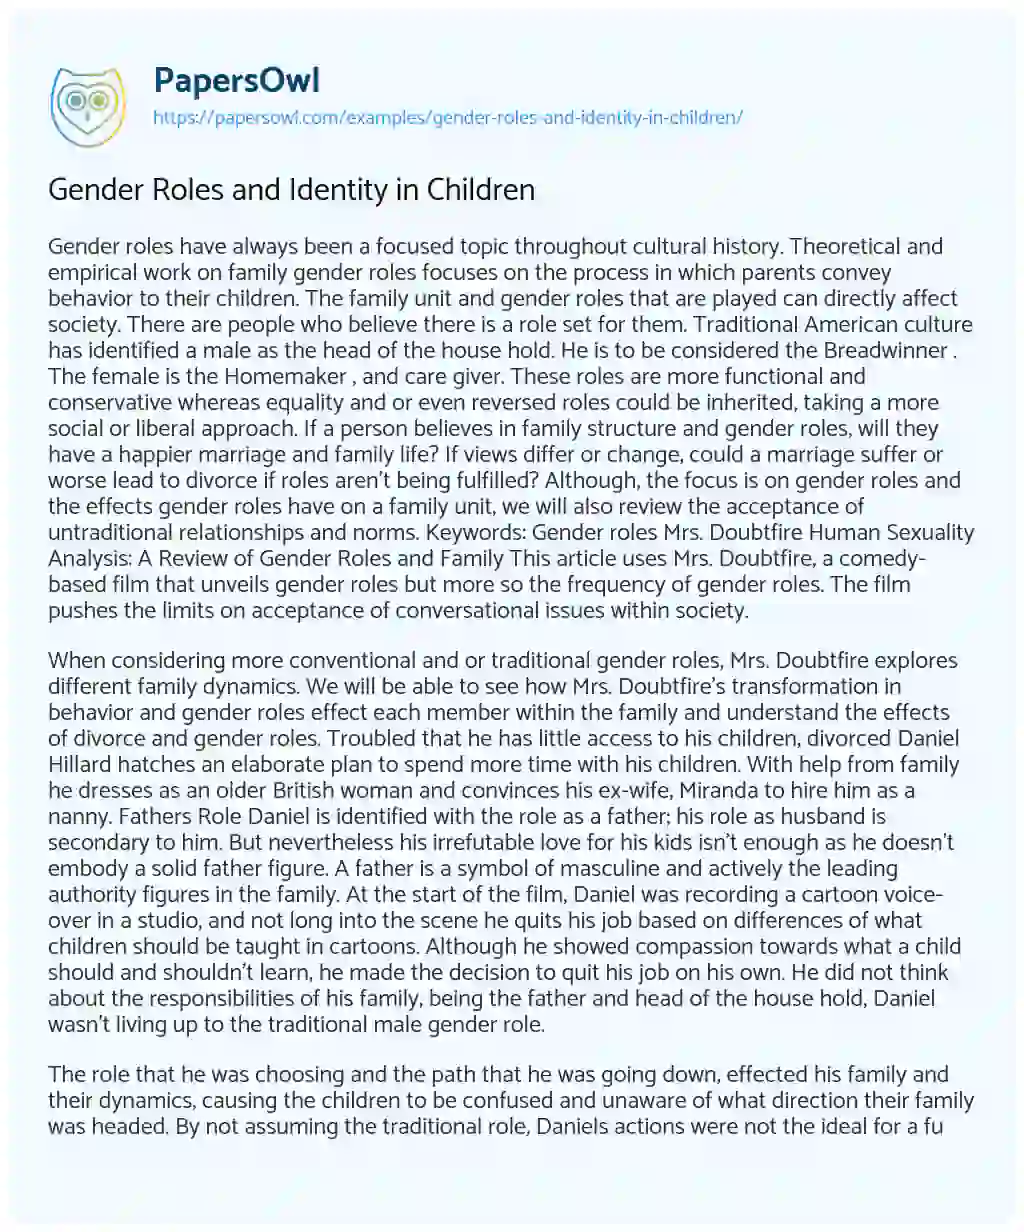 Essay on Gender Roles and Identity in Children